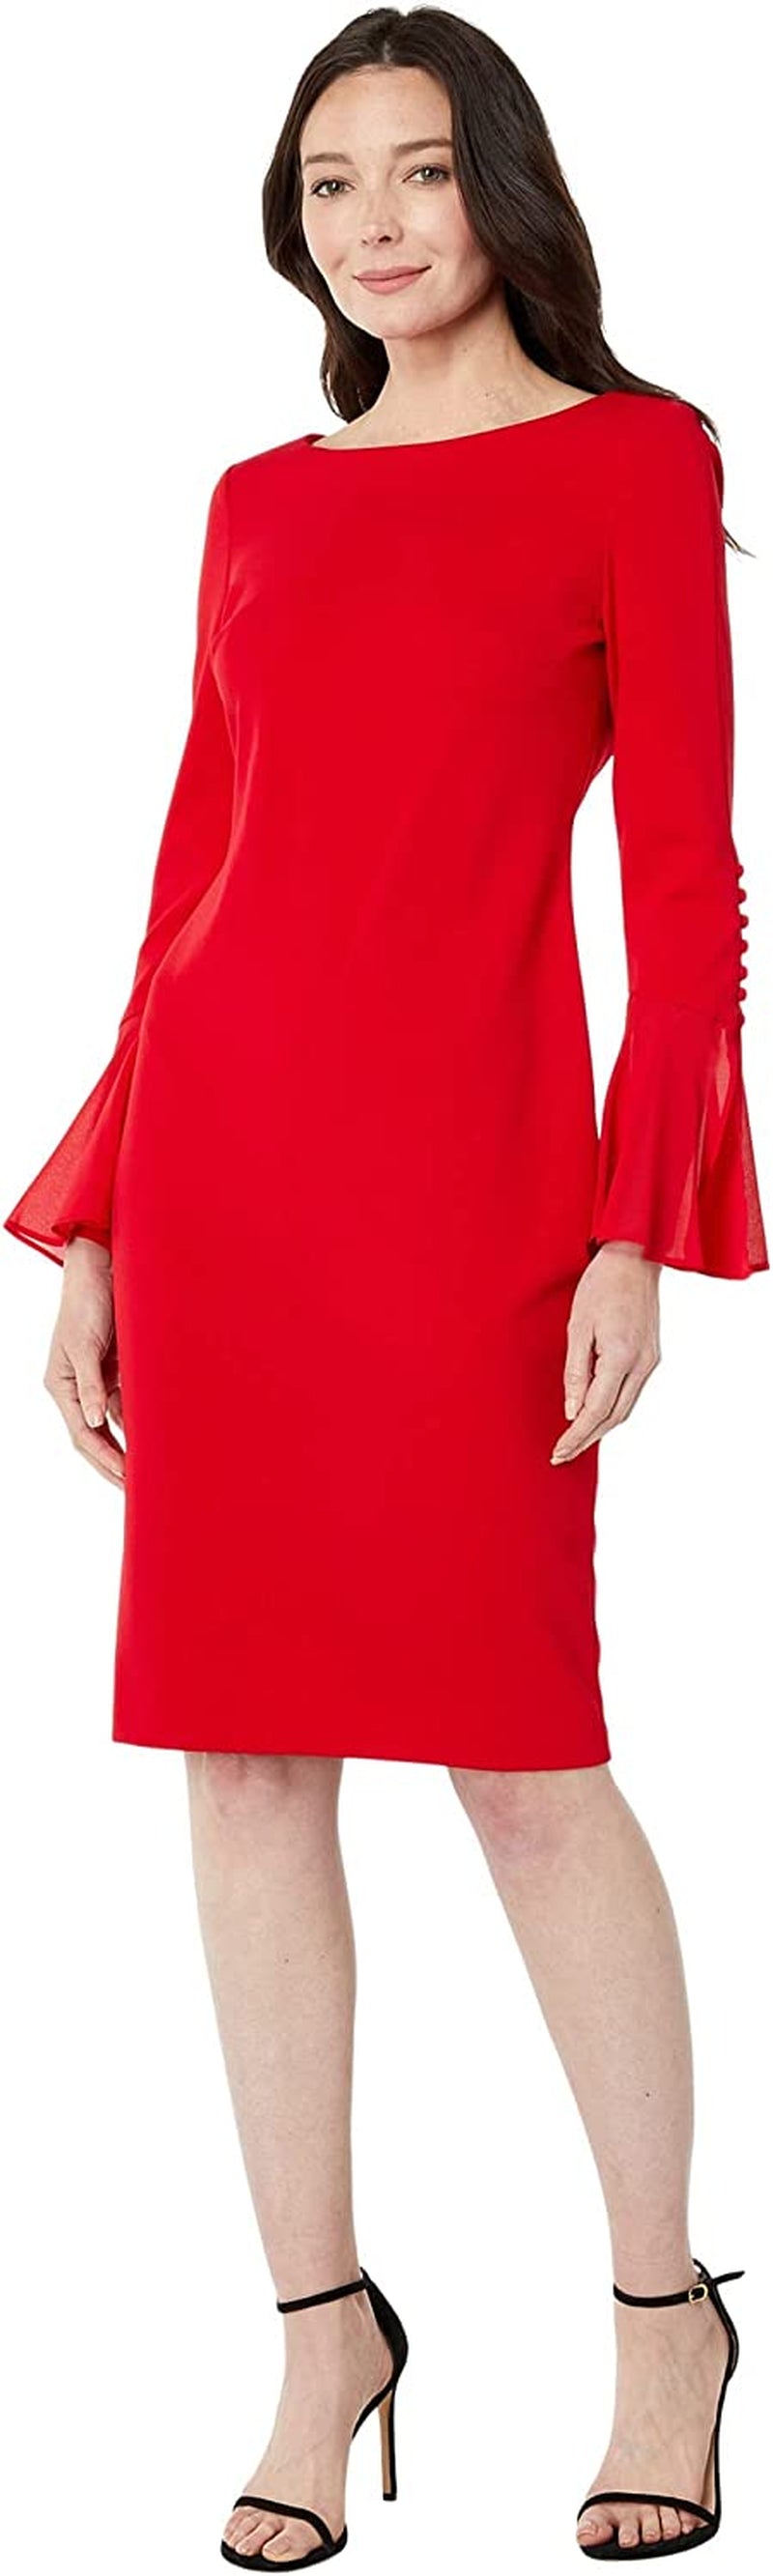 Calvin Klein Womens Solid Sheath with Chiffon Bell Sleeves Dress -  